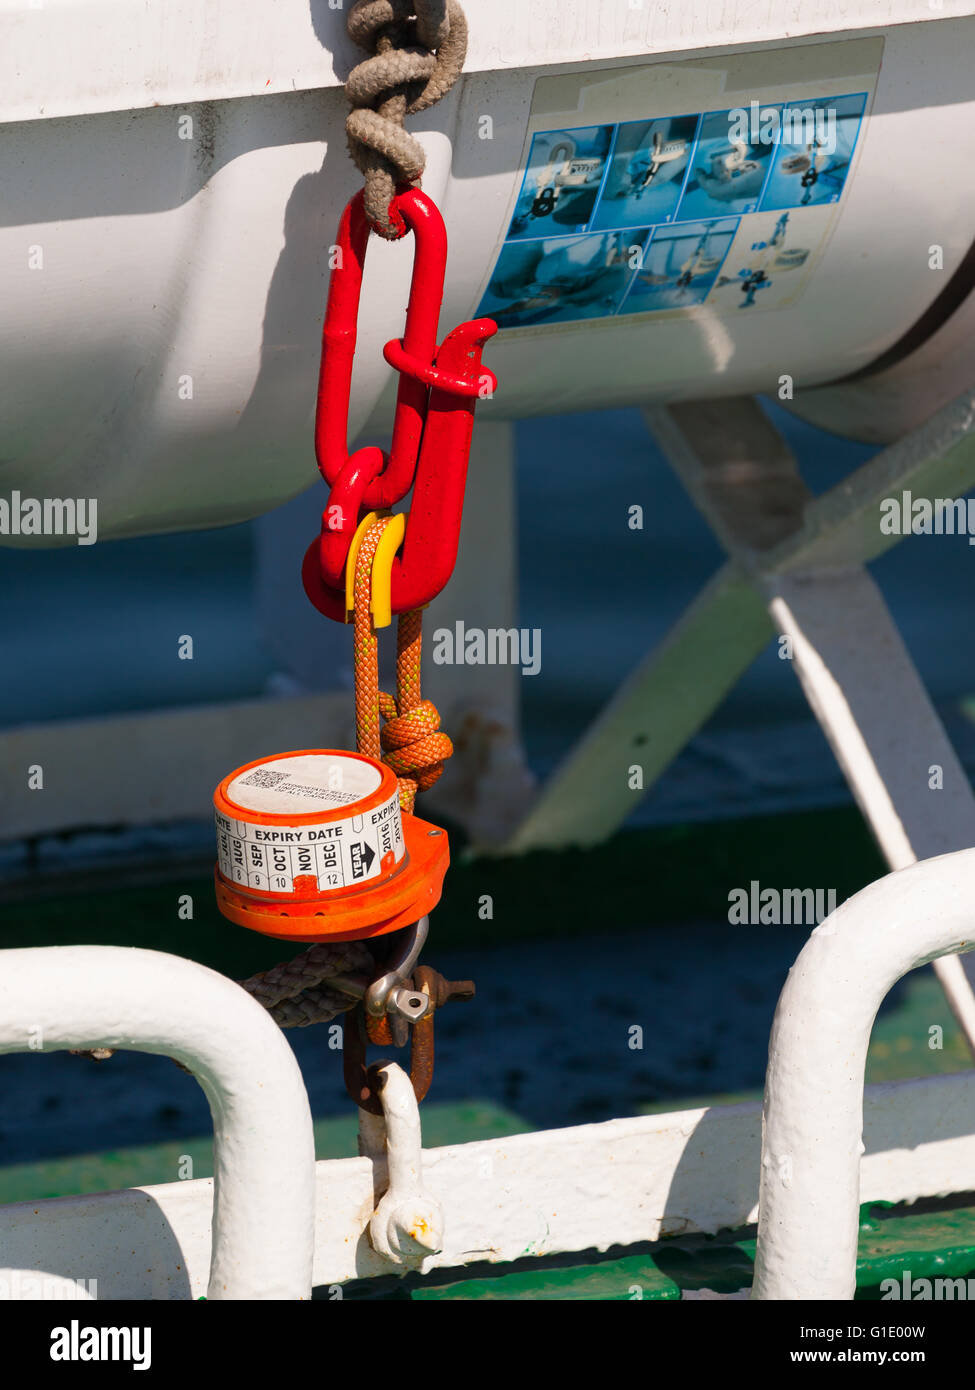 Hydrostatic release mechanism unit for liferaft with expiry date. Stock Photo